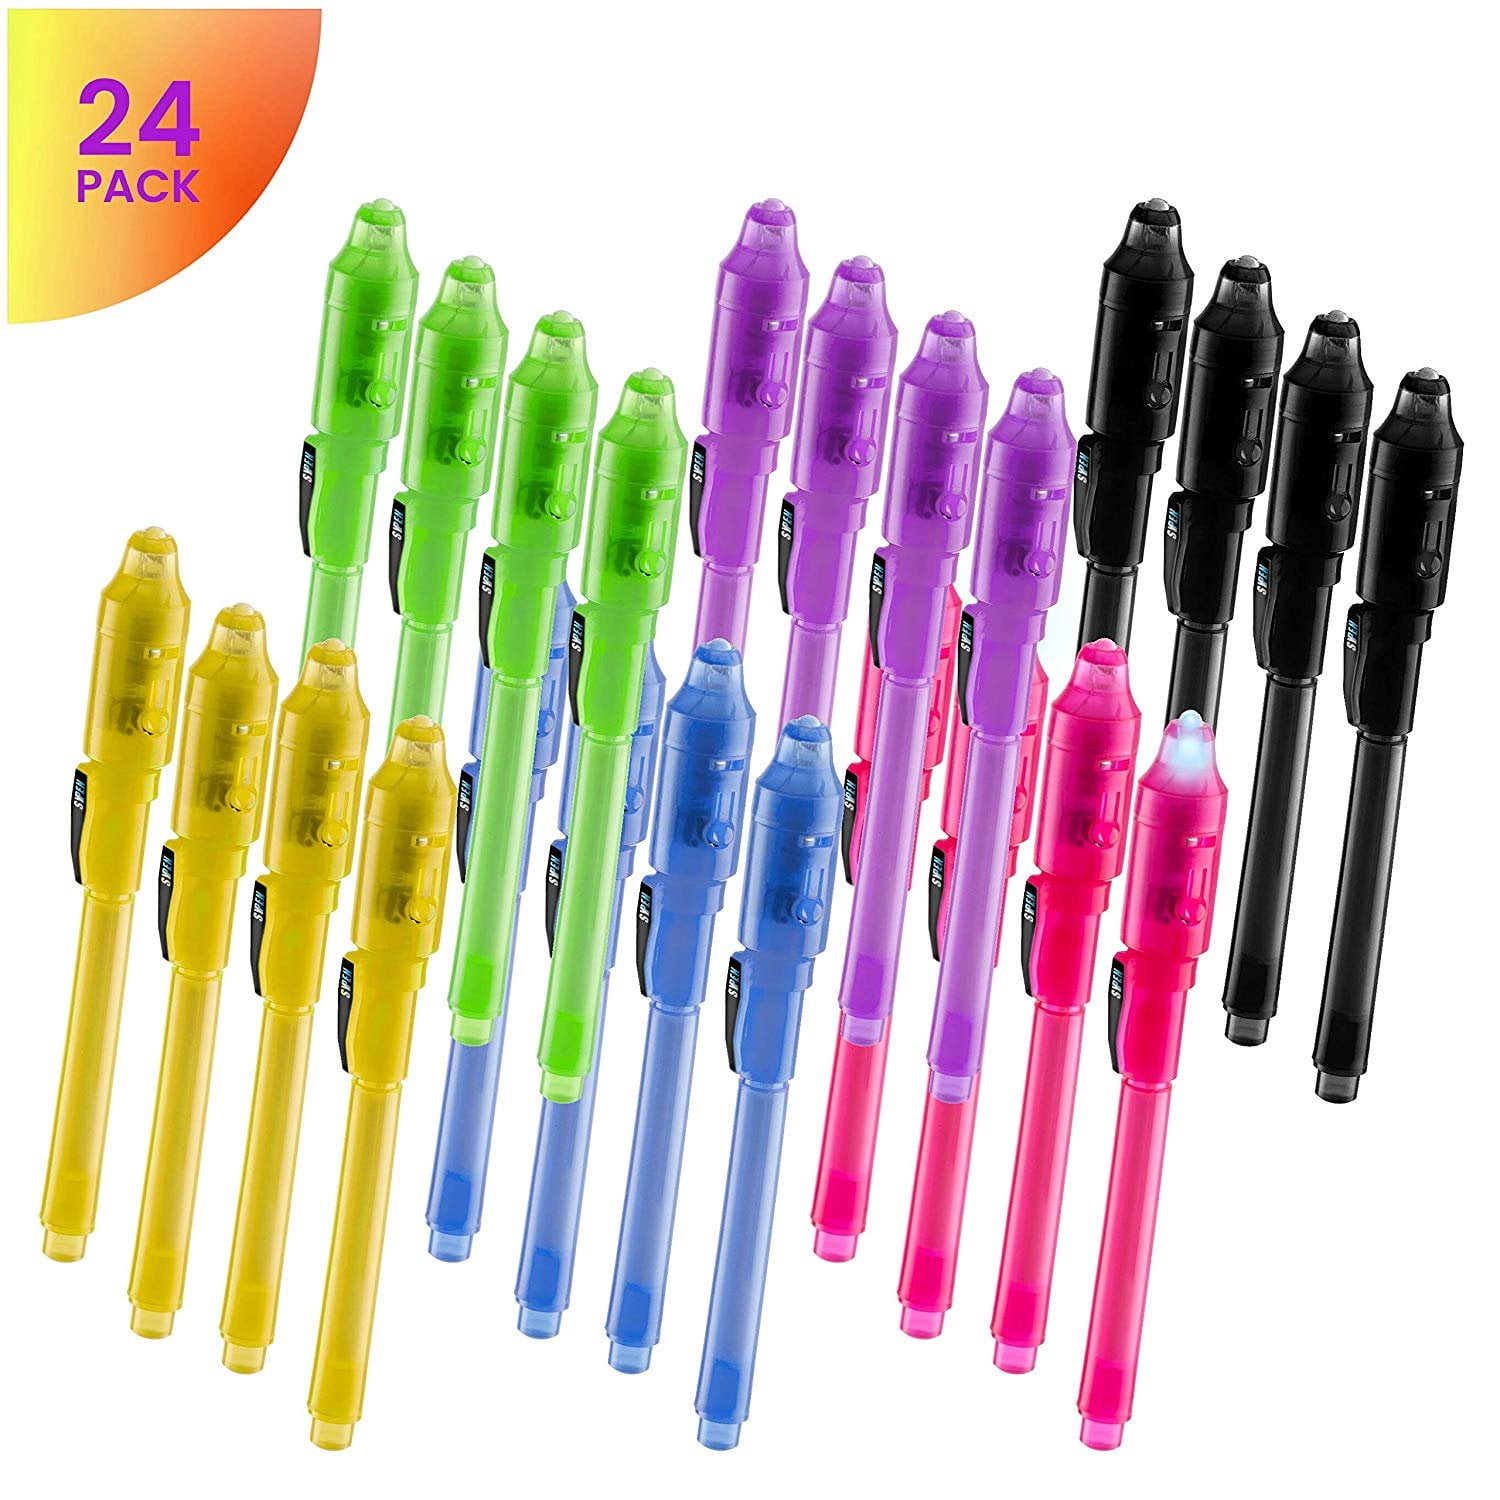 Spy Pen with Disappearing Ink and UV Light 12 Pack 